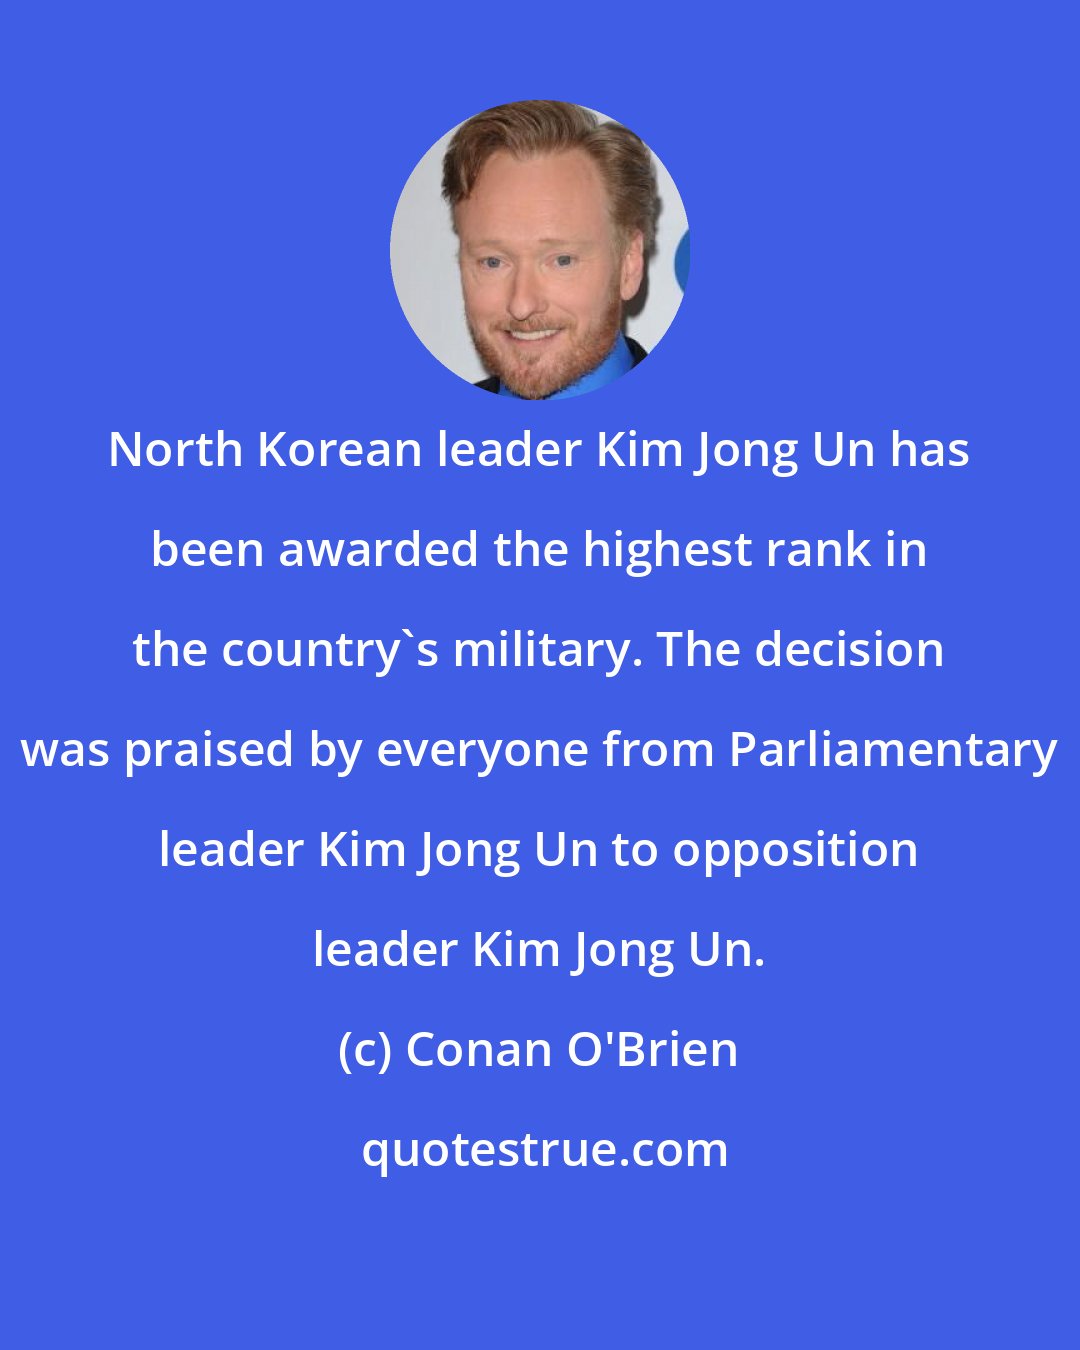 Conan O'Brien: North Korean leader Kim Jong Un has been awarded the highest rank in the country's military. The decision was praised by everyone from Parliamentary leader Kim Jong Un to opposition leader Kim Jong Un.